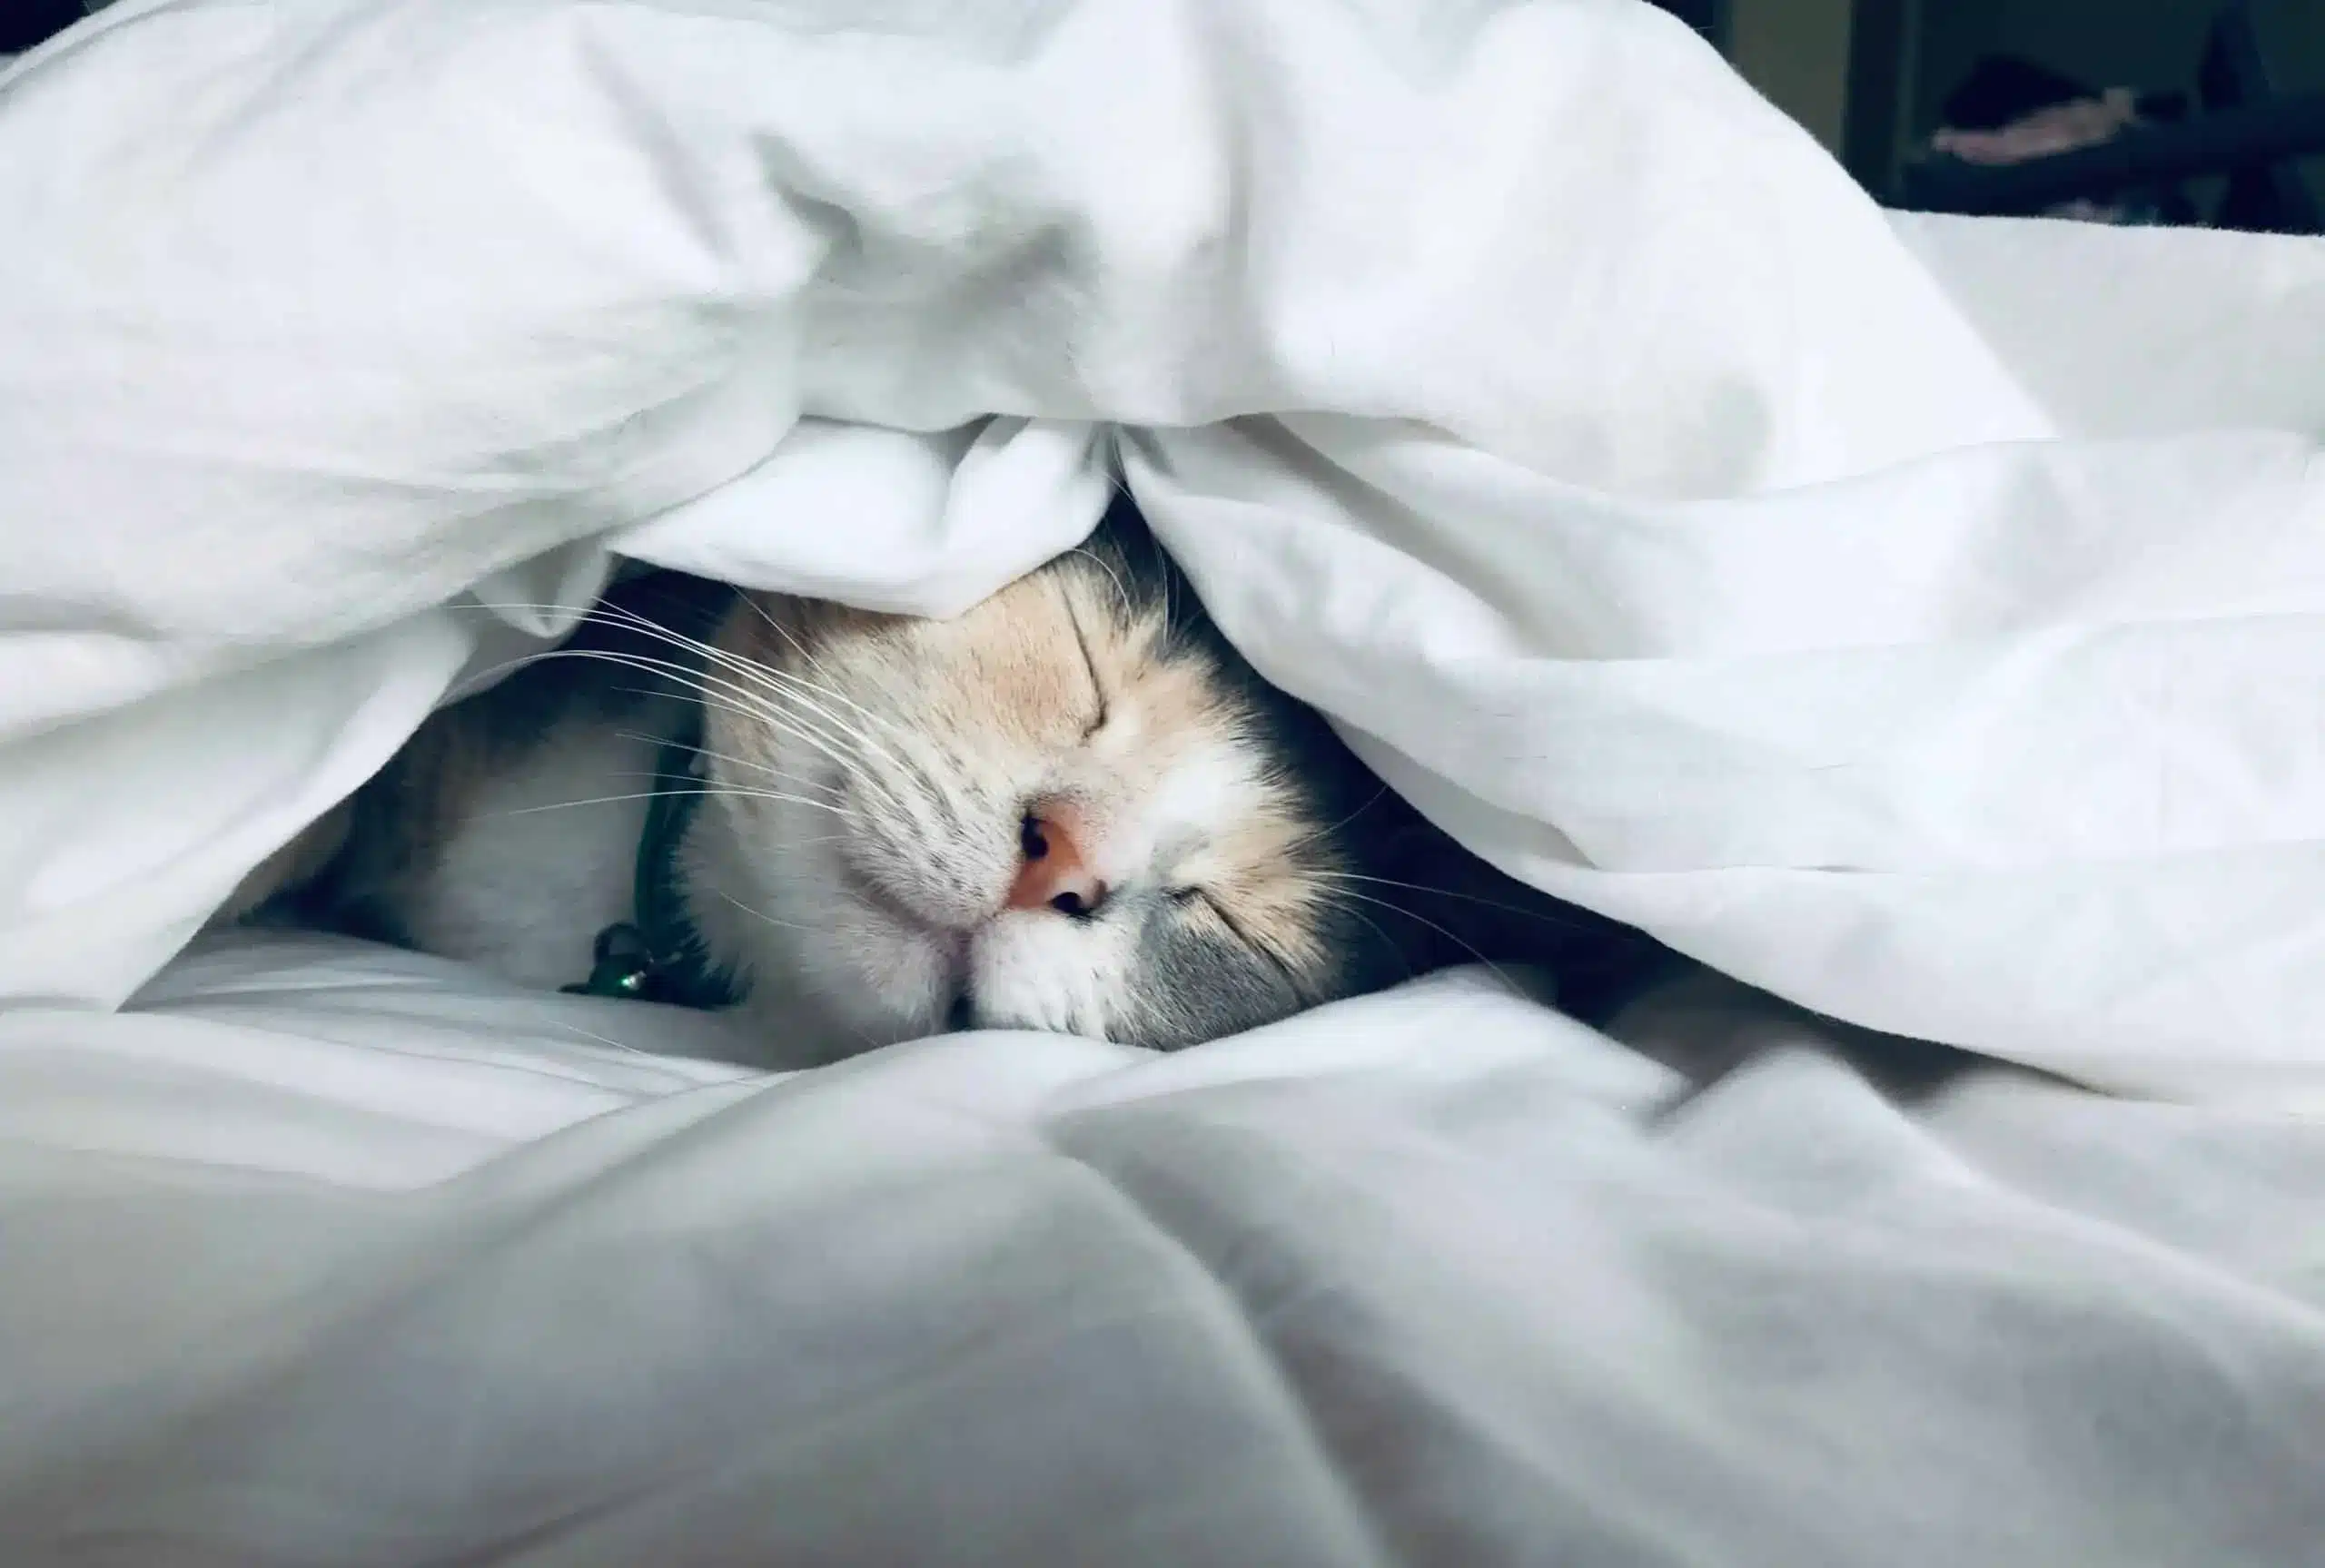 https://www.pd.com.au/wp-content/uploads/2023/02/cat-asleep-on-white-bed-scaled-1.webp